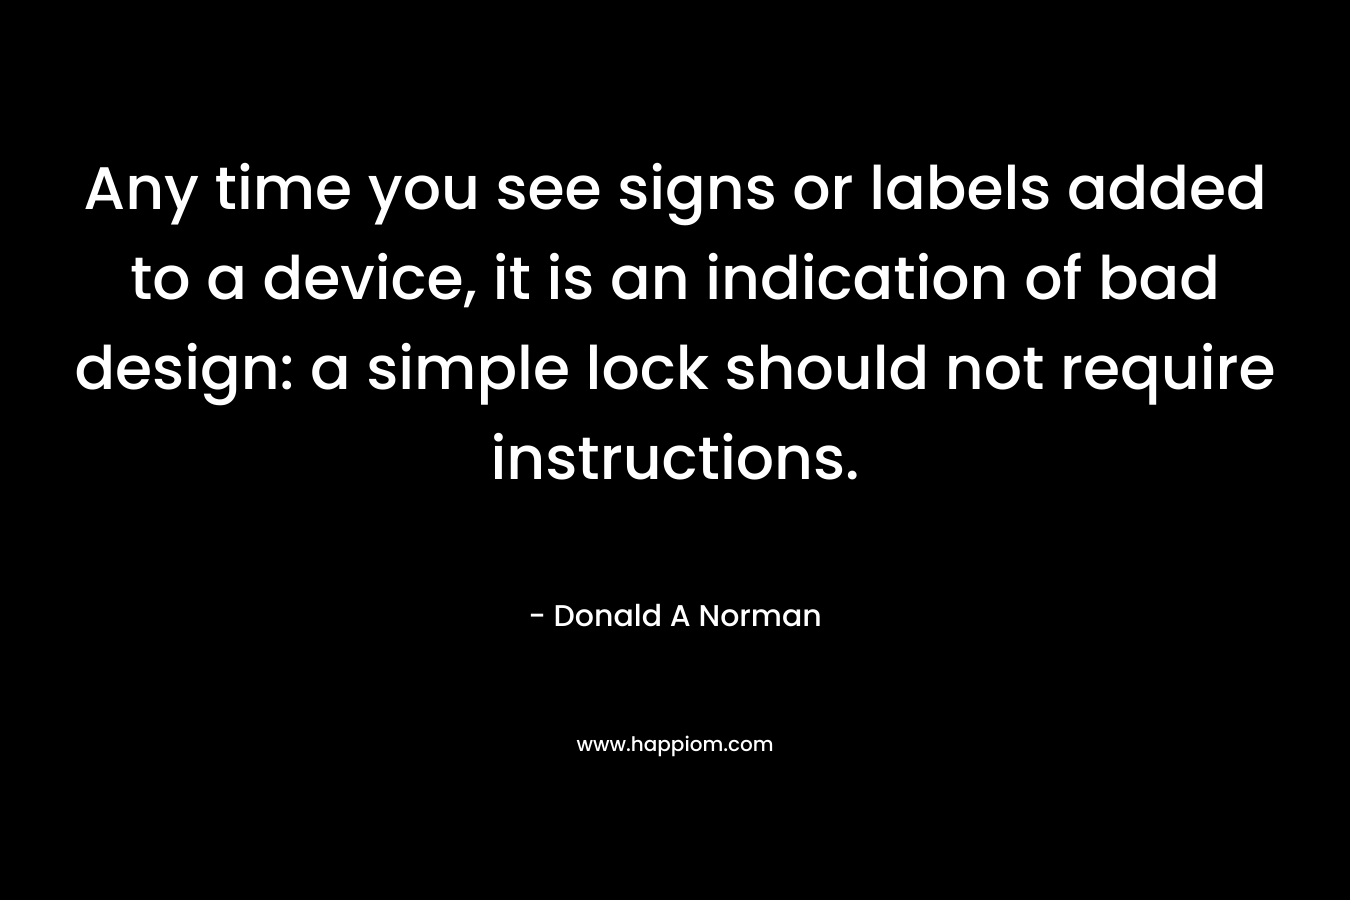 Any time you see signs or labels added to a device, it is an indication of bad design: a simple lock should not require instructions. – Donald A Norman